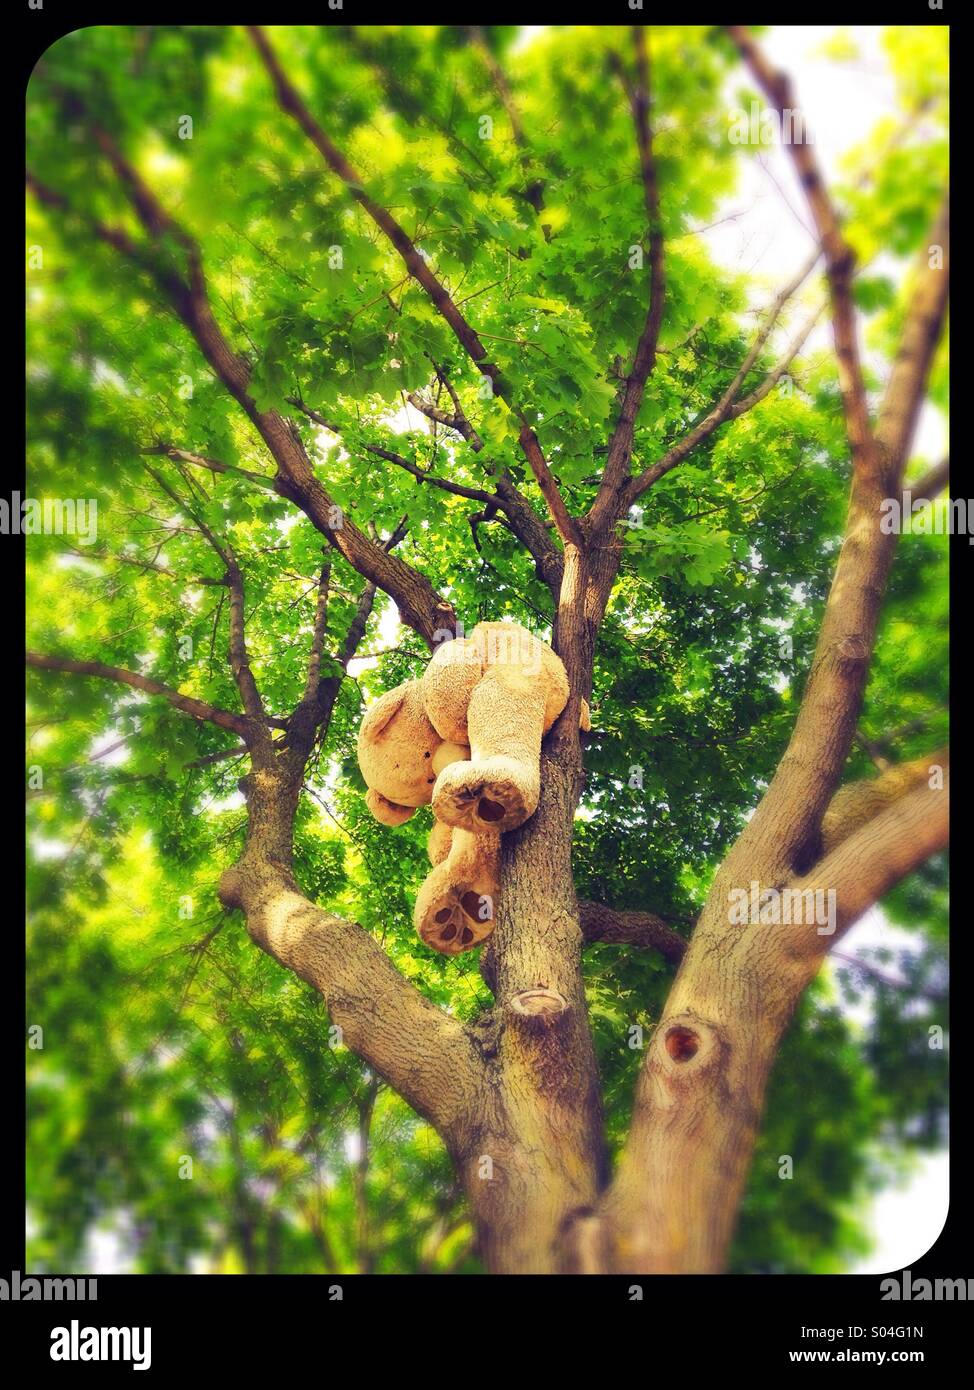 A stuffed bear up in a tree. Stock Photo